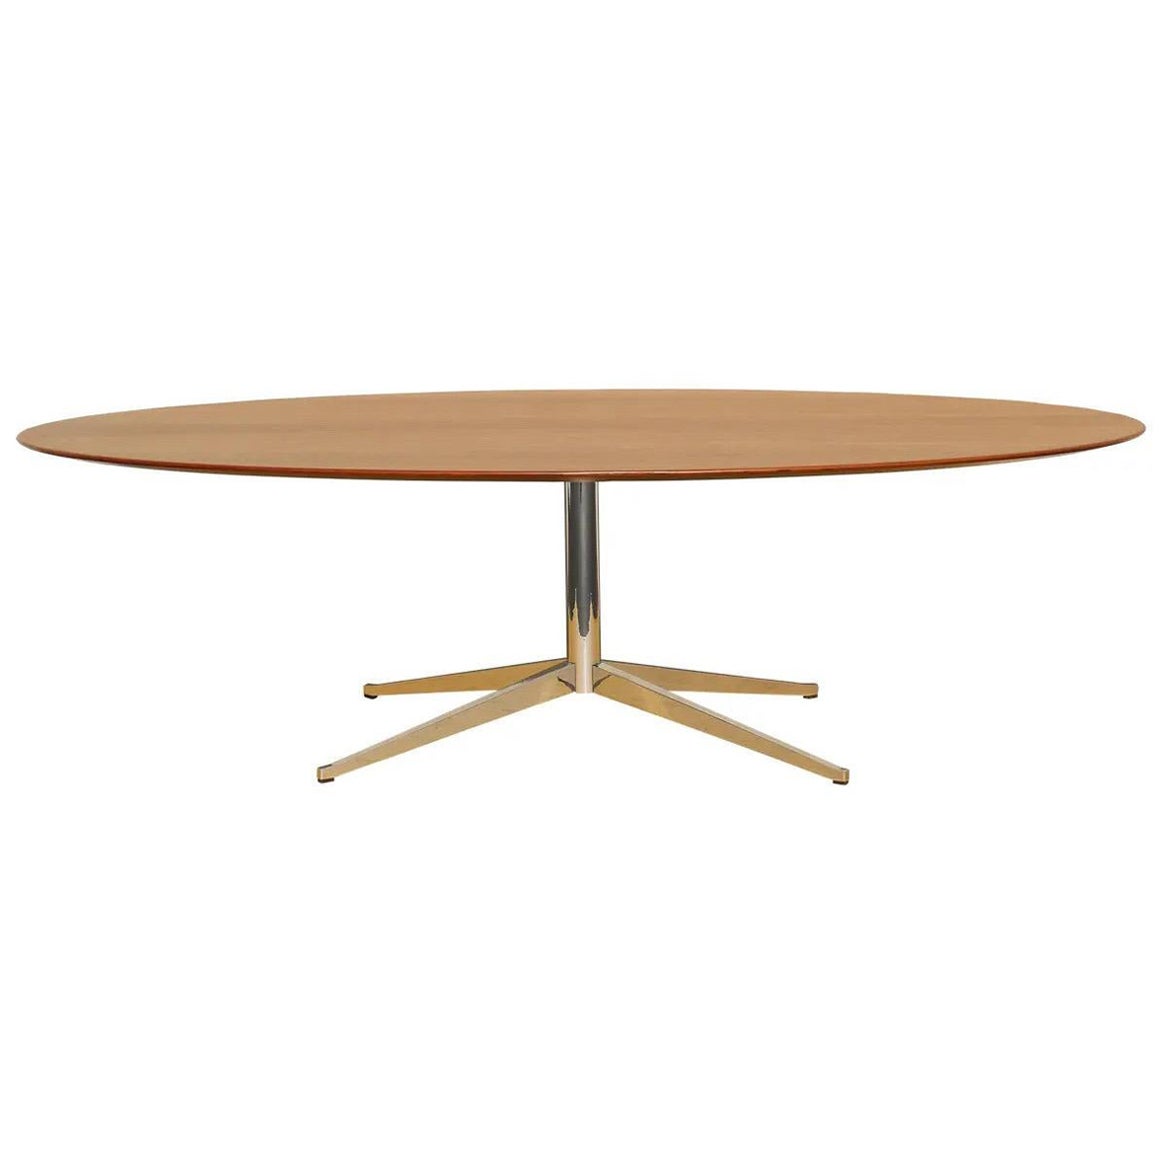 1960s Mid-Century Modern Oval Walnut Conference Table Desk by Florence Knoll